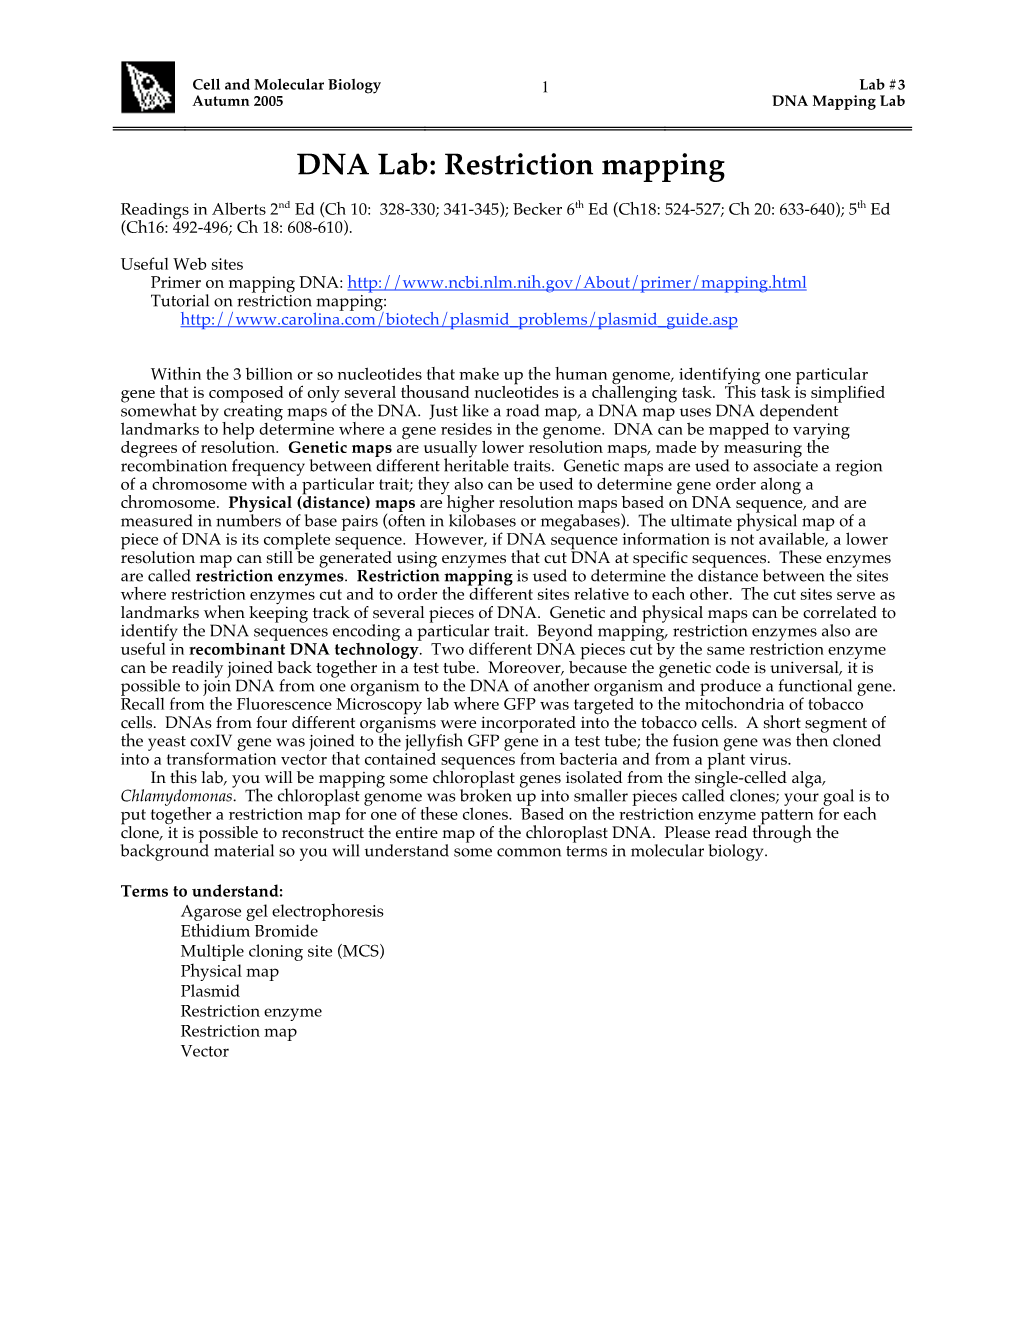 DNA Lab: Restriction Mapping